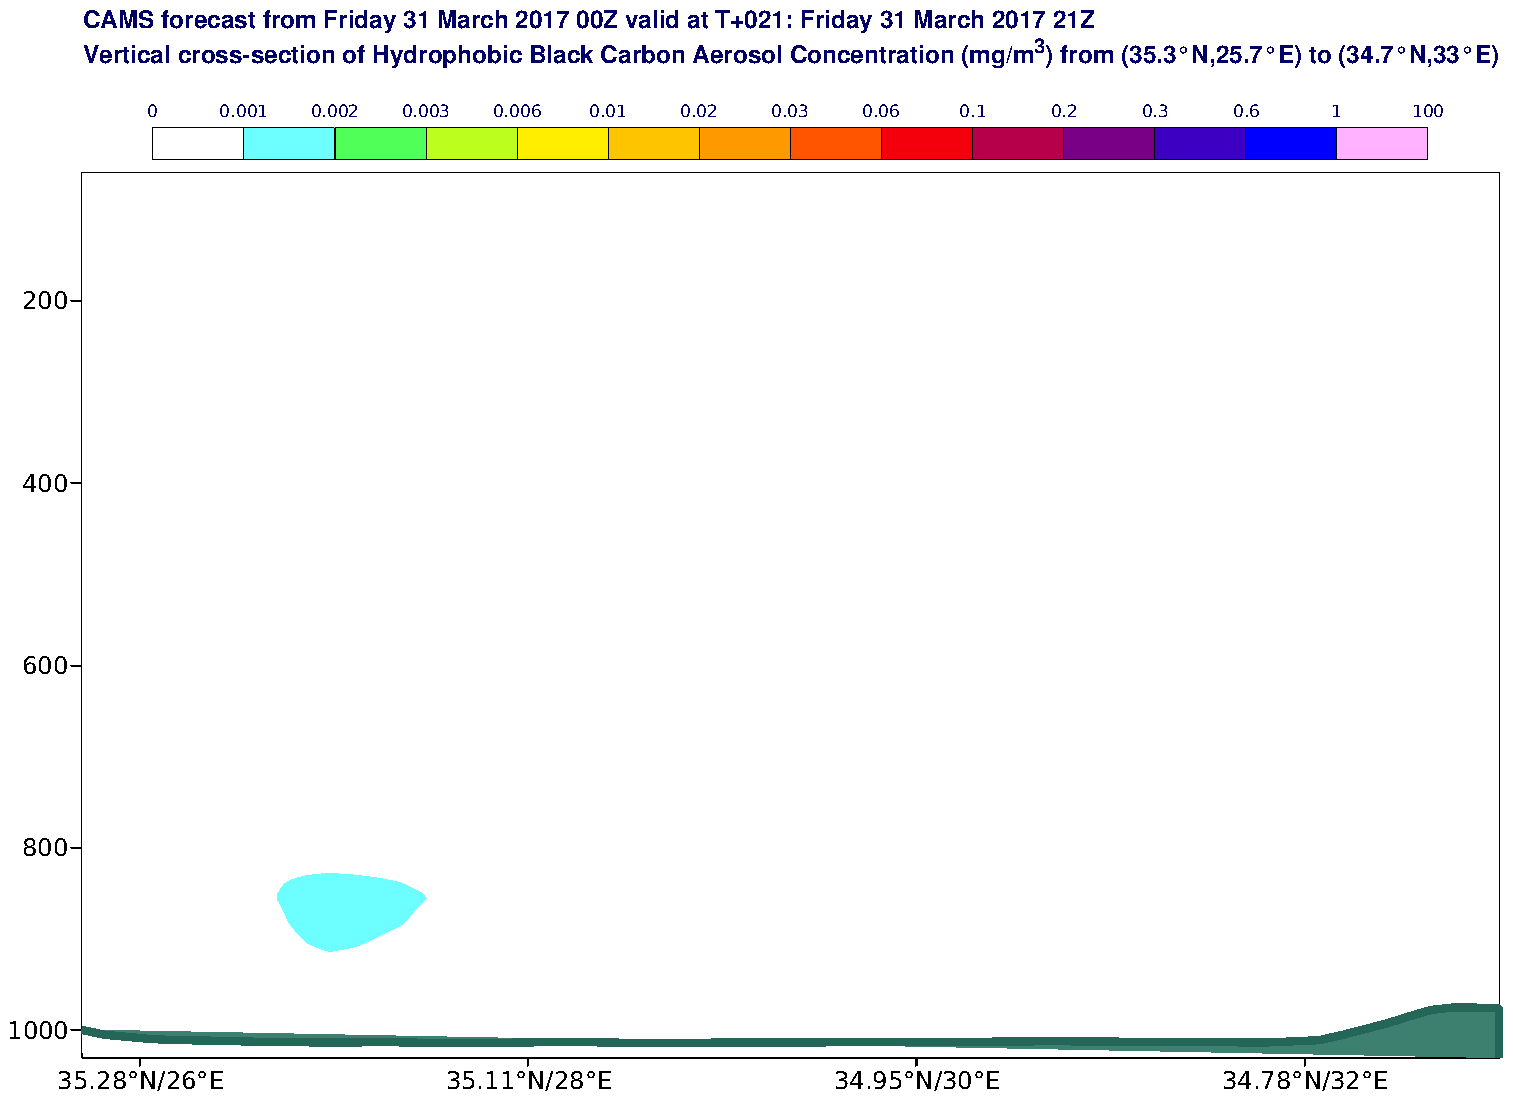 Vertical cross-section of Hydrophobic Black Carbon Aerosol Concentration (mg/m3) valid at T21 - 2017-03-31 21:00